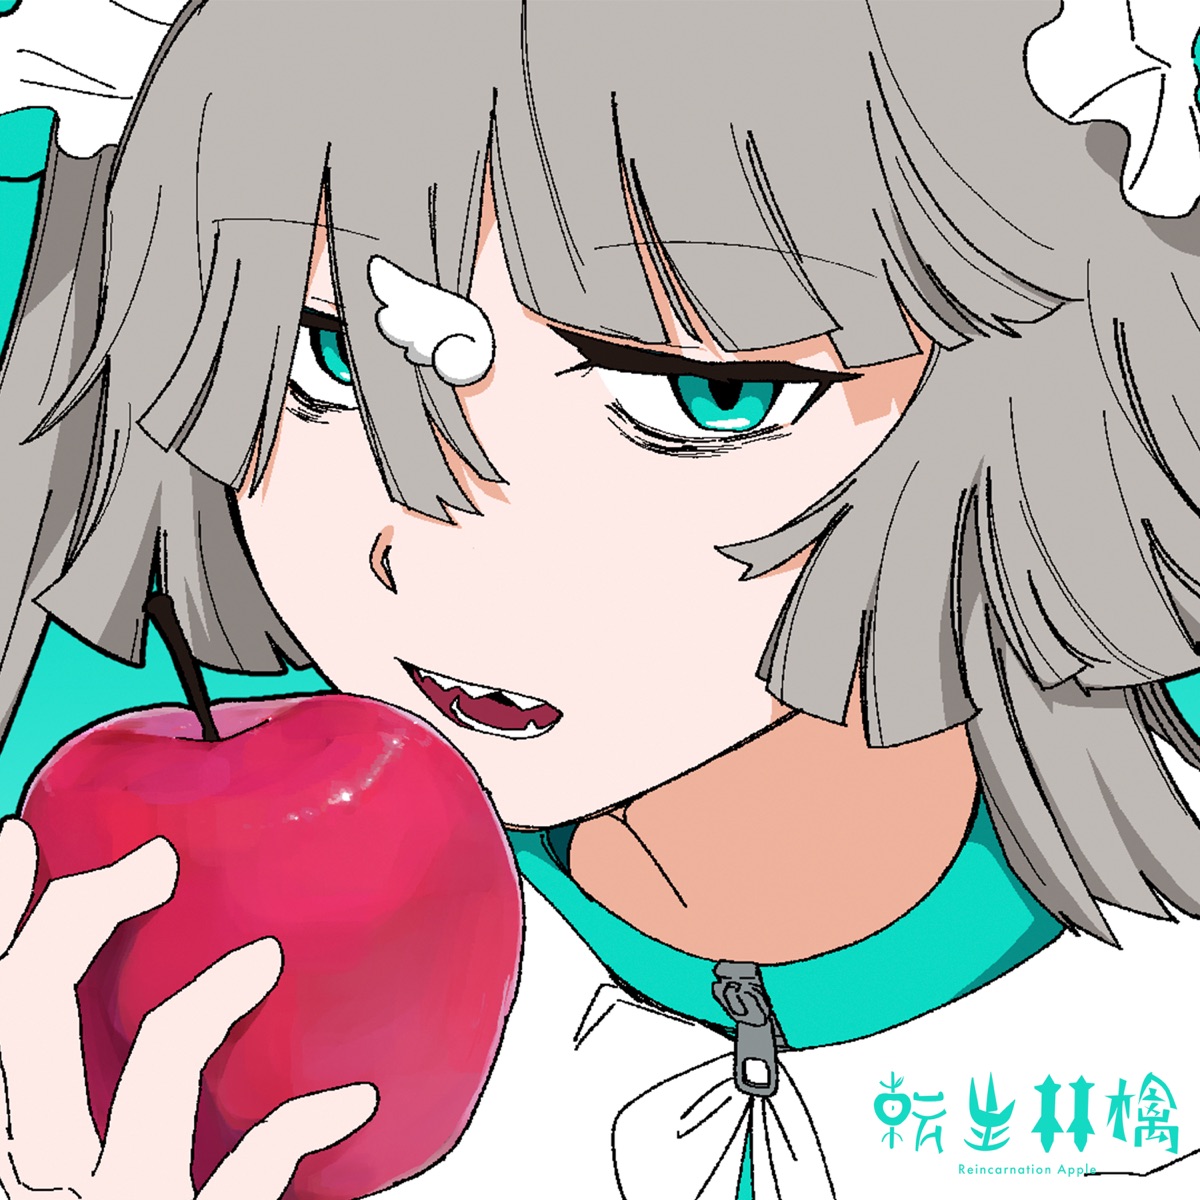 Cover art for『pinocchioP - Reincarnation Apple』from the release『Reincarnation Apple』